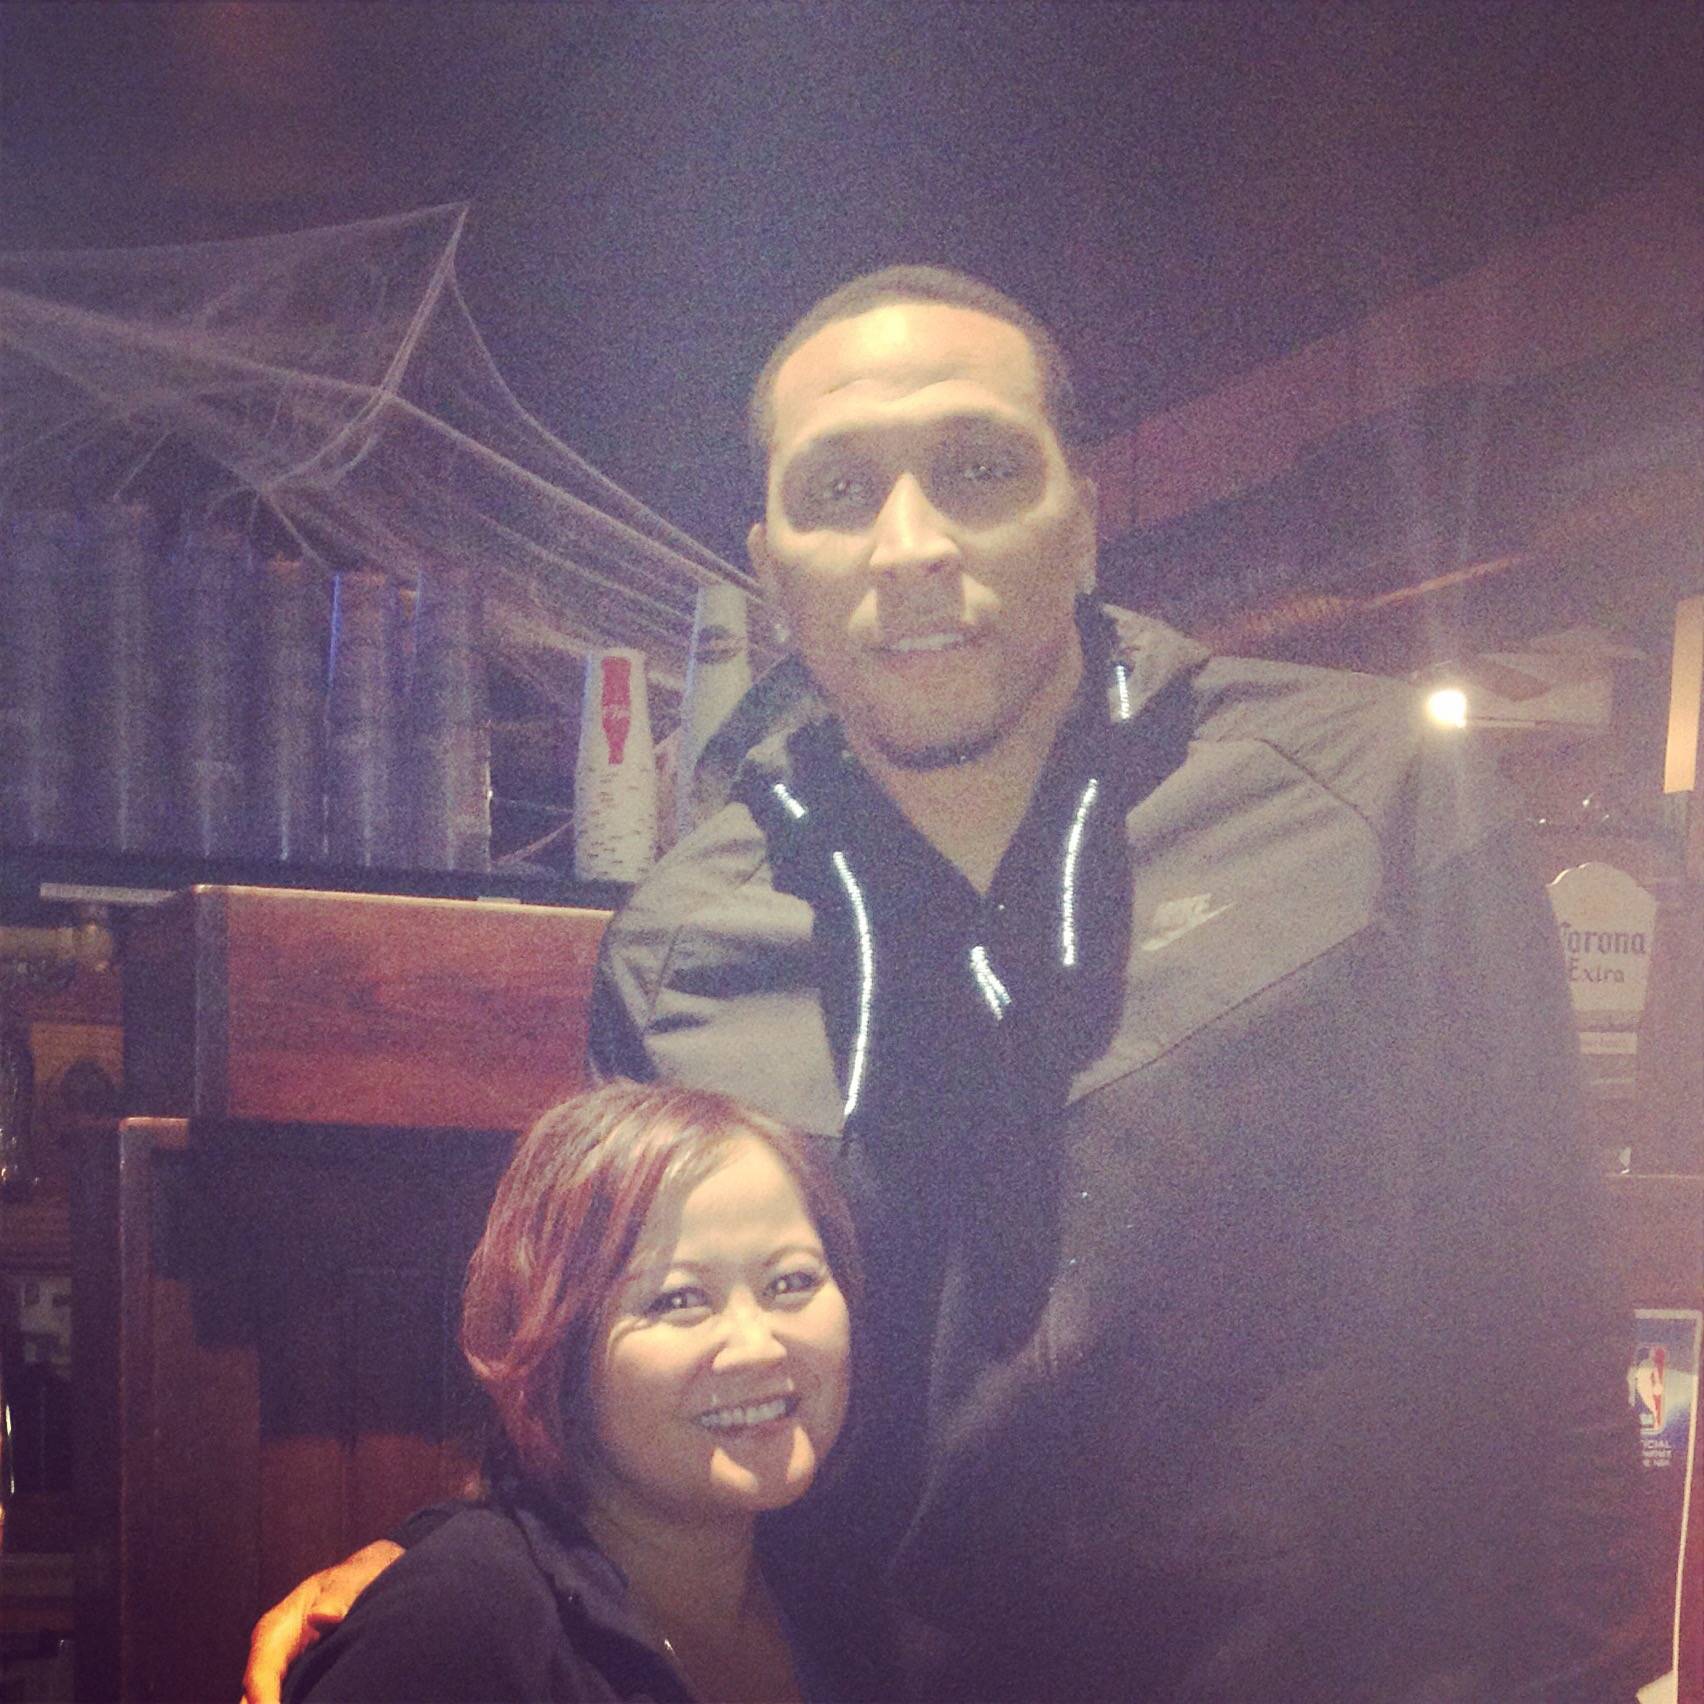 Shawn Marion makes me look short